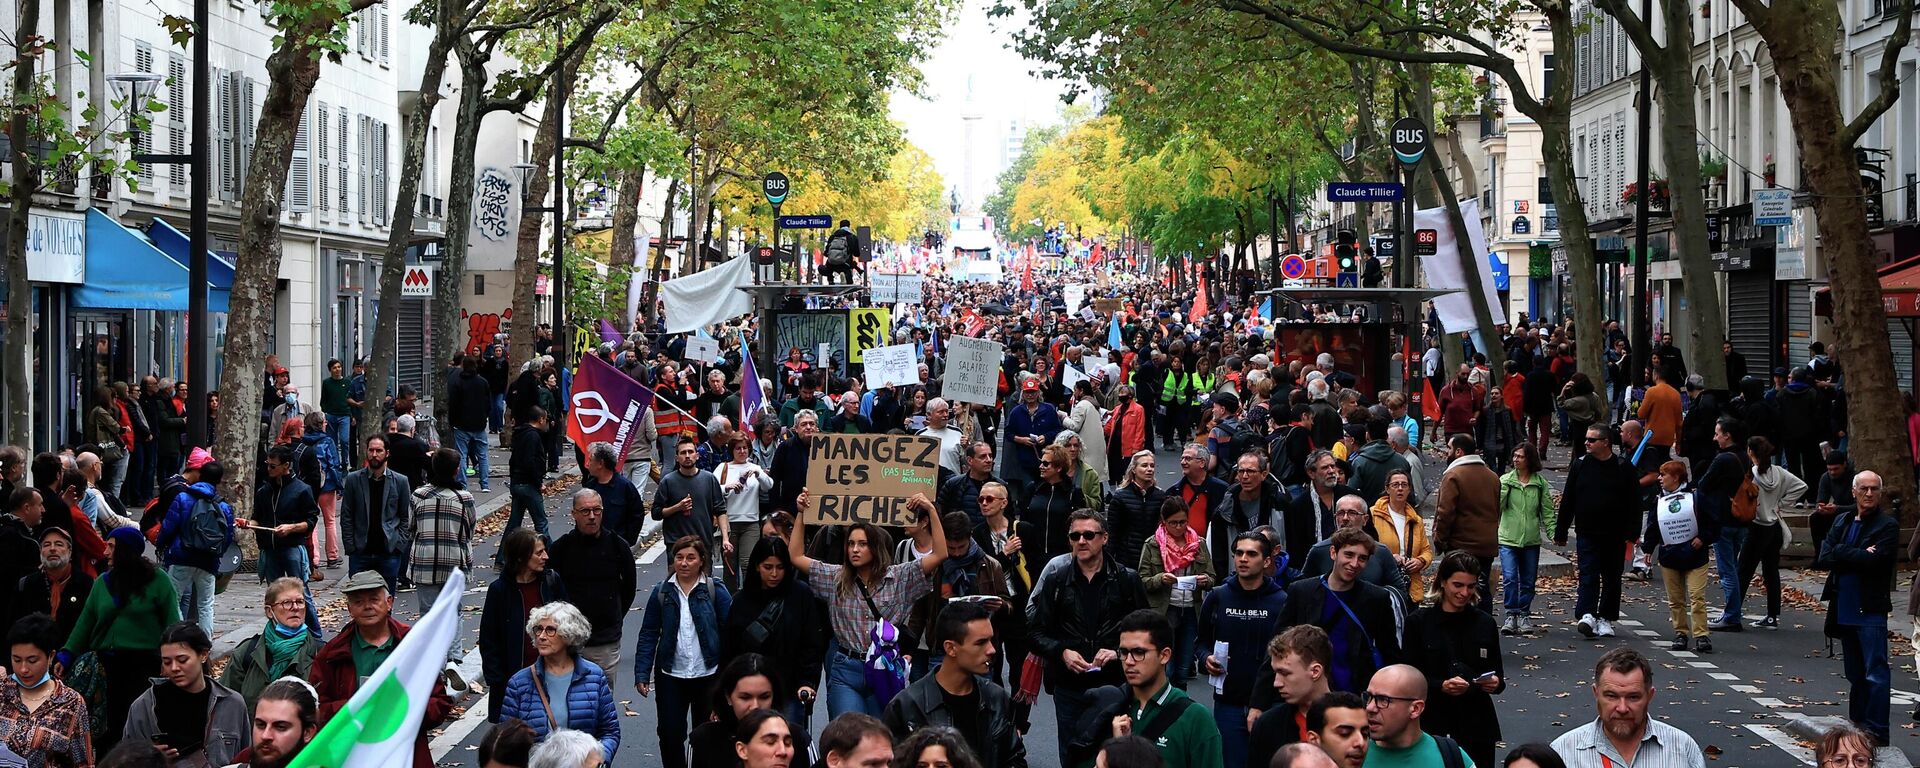 People gather for a march against the high cost of living and climate inaction in Paris, France, Sunday Oct. 16, 2022.  - Sputnik International, 1920, 16.10.2022